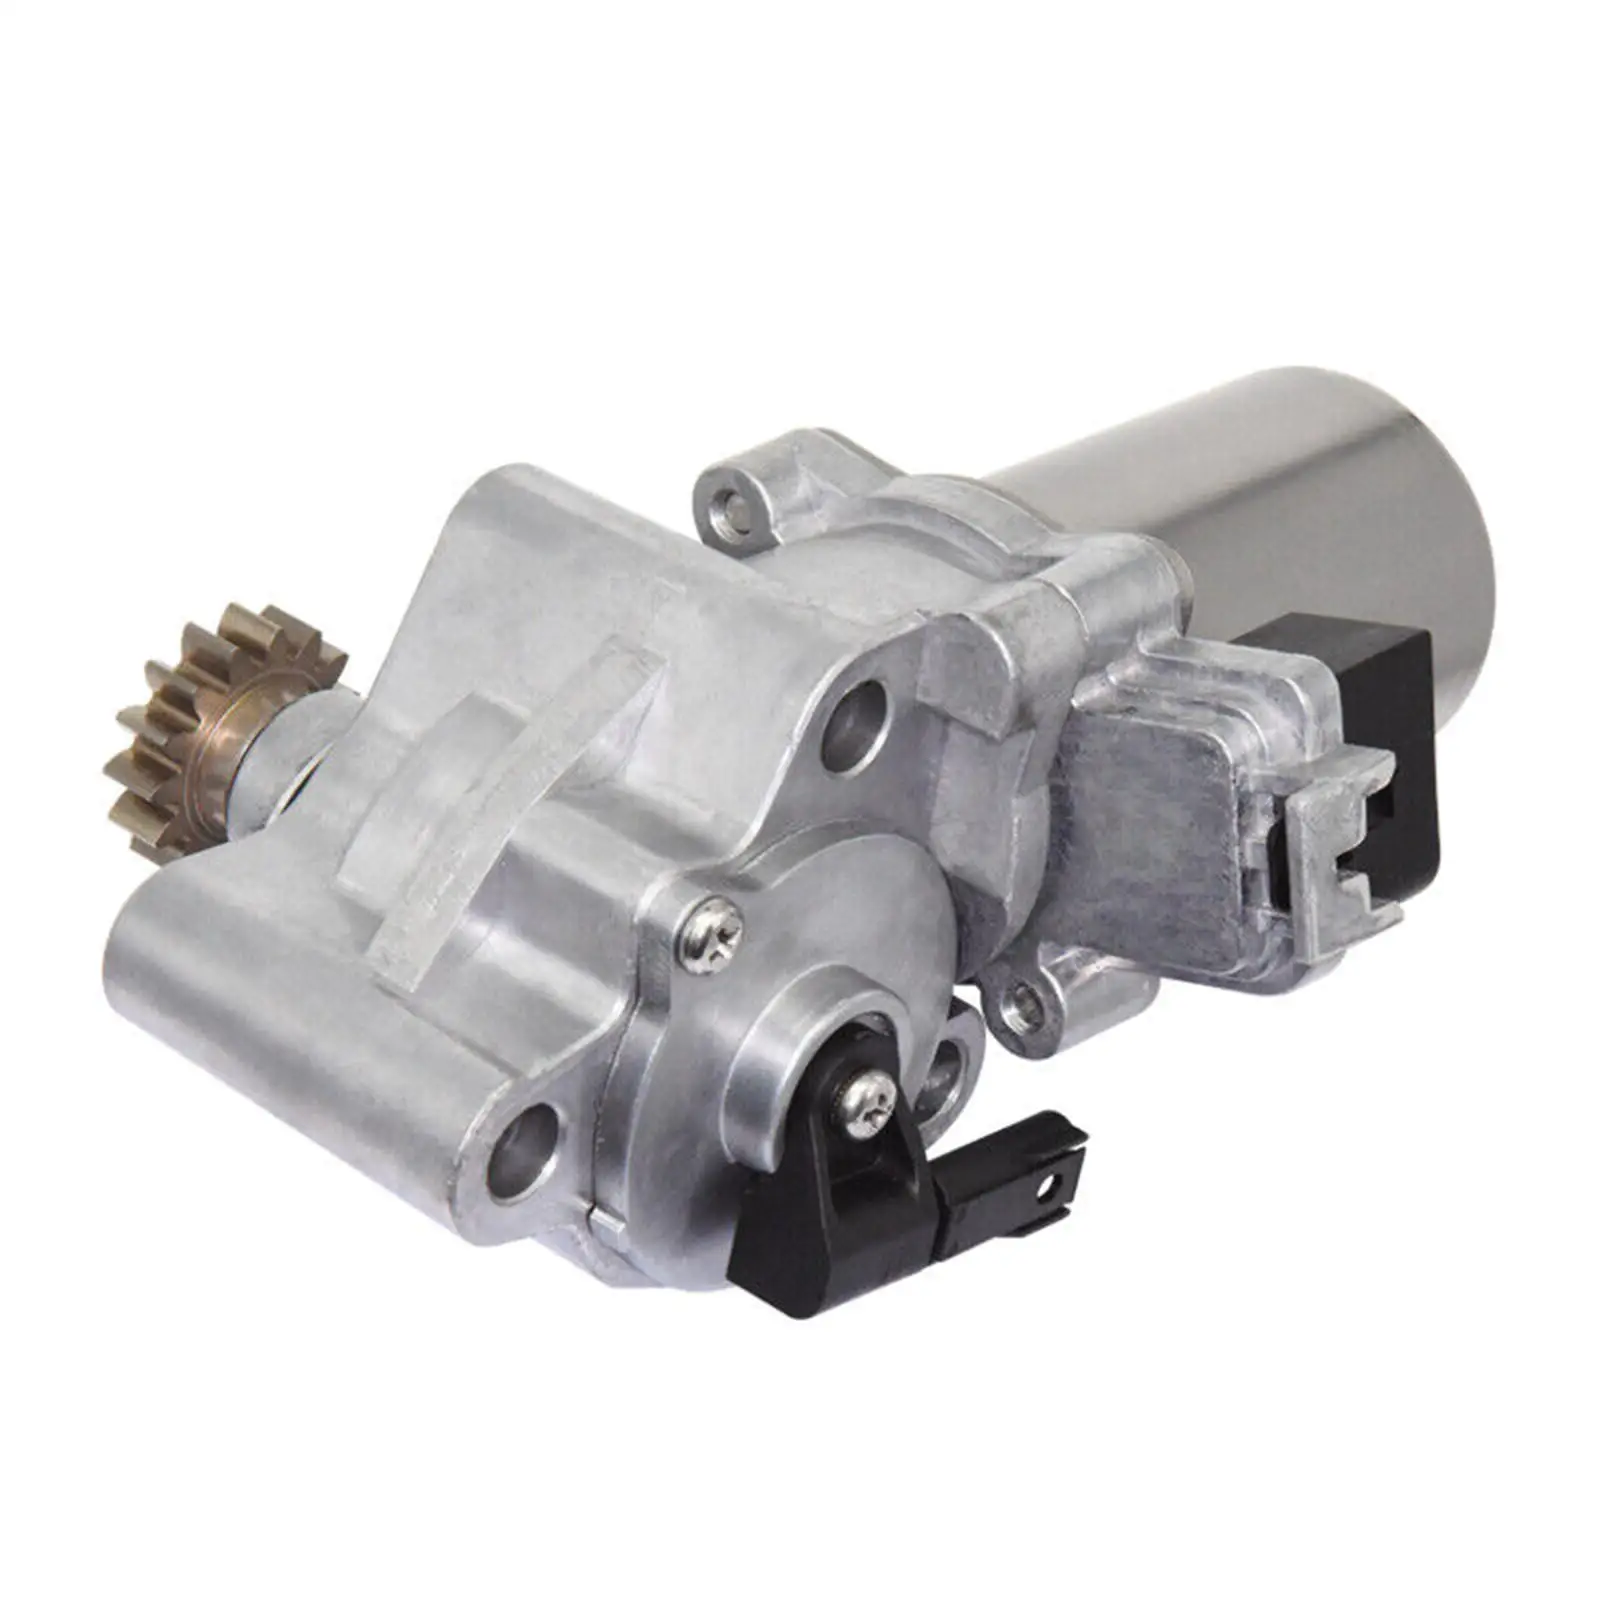 Automobile Transfer Case Motor Actuator 27107546671 for BMW 328i 528i 530Xi 3.0L Direct Replaces Spare Parts Assembly